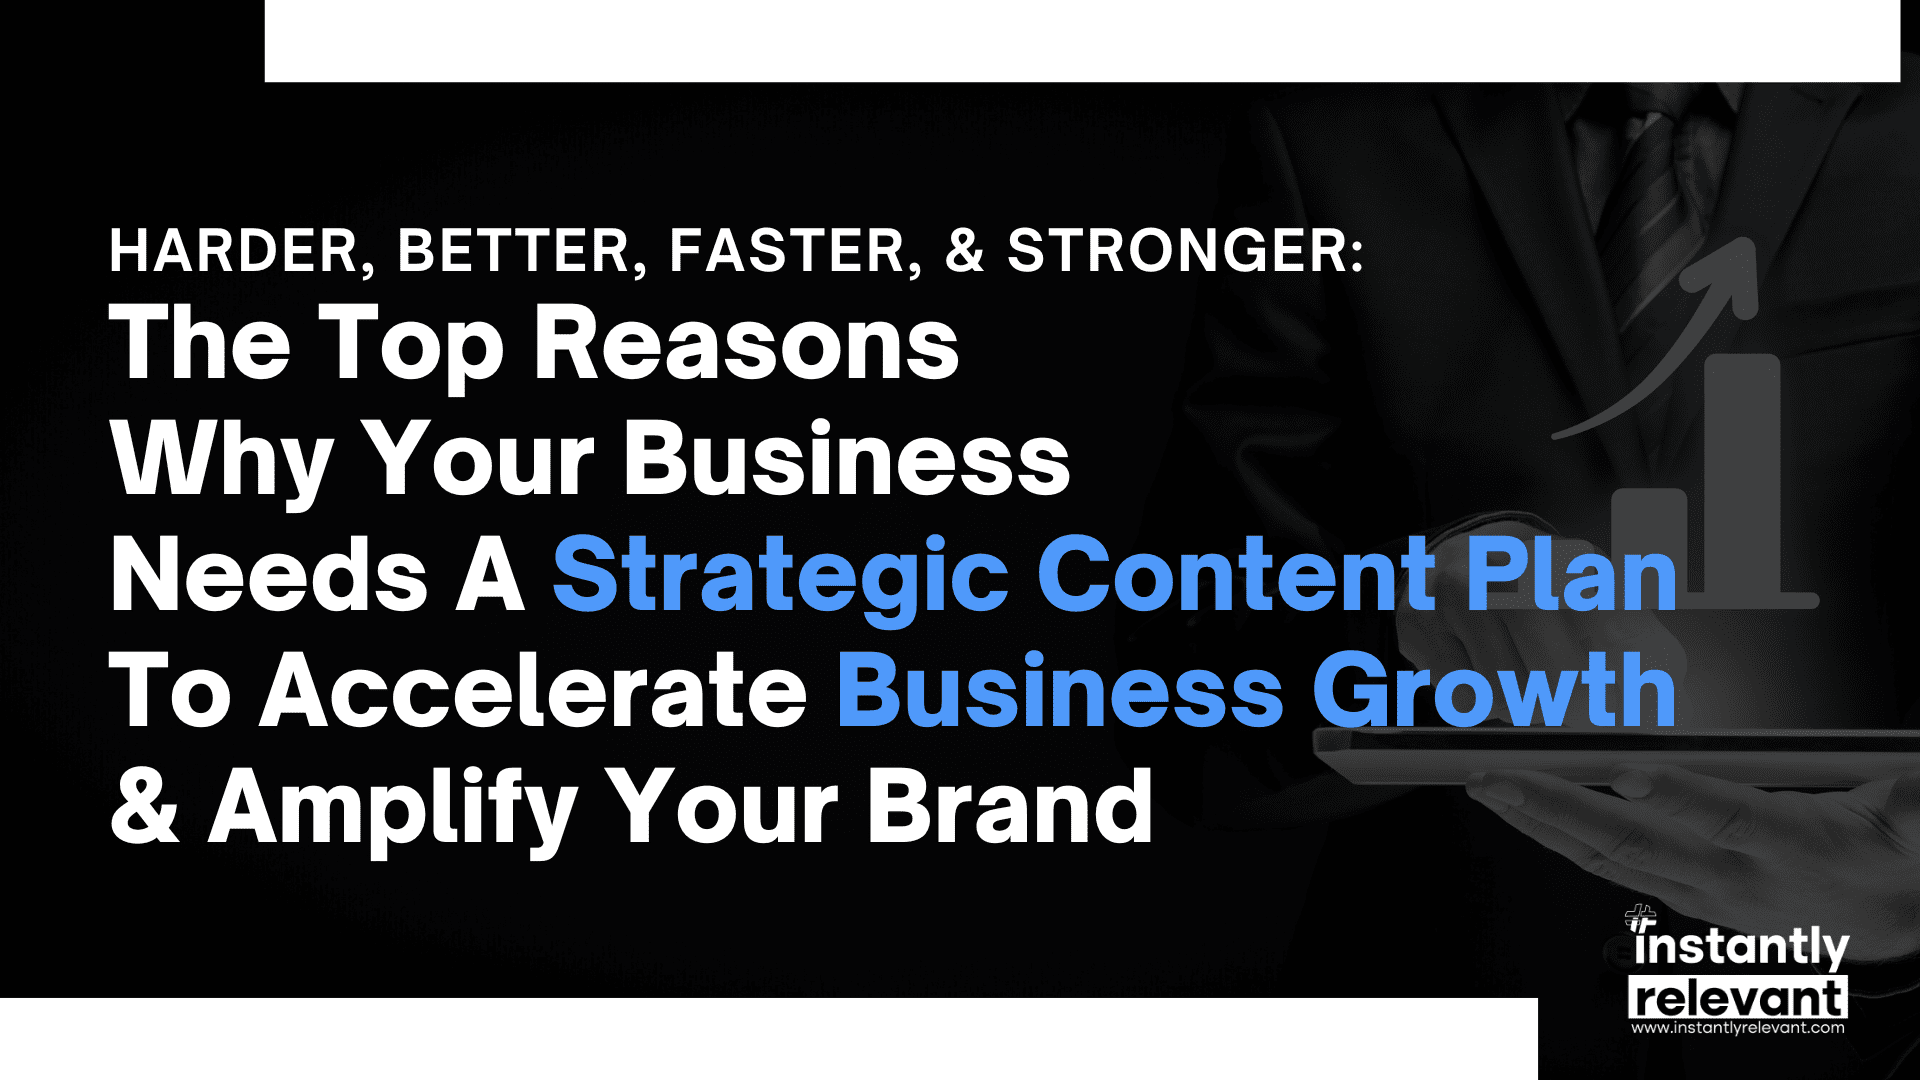 Harder, Better, Faster, & Stronger: The Top Reasons Why Your Business Needs A Strategic Content Plan to Accelerate Business Growth & Amplify Your Brand